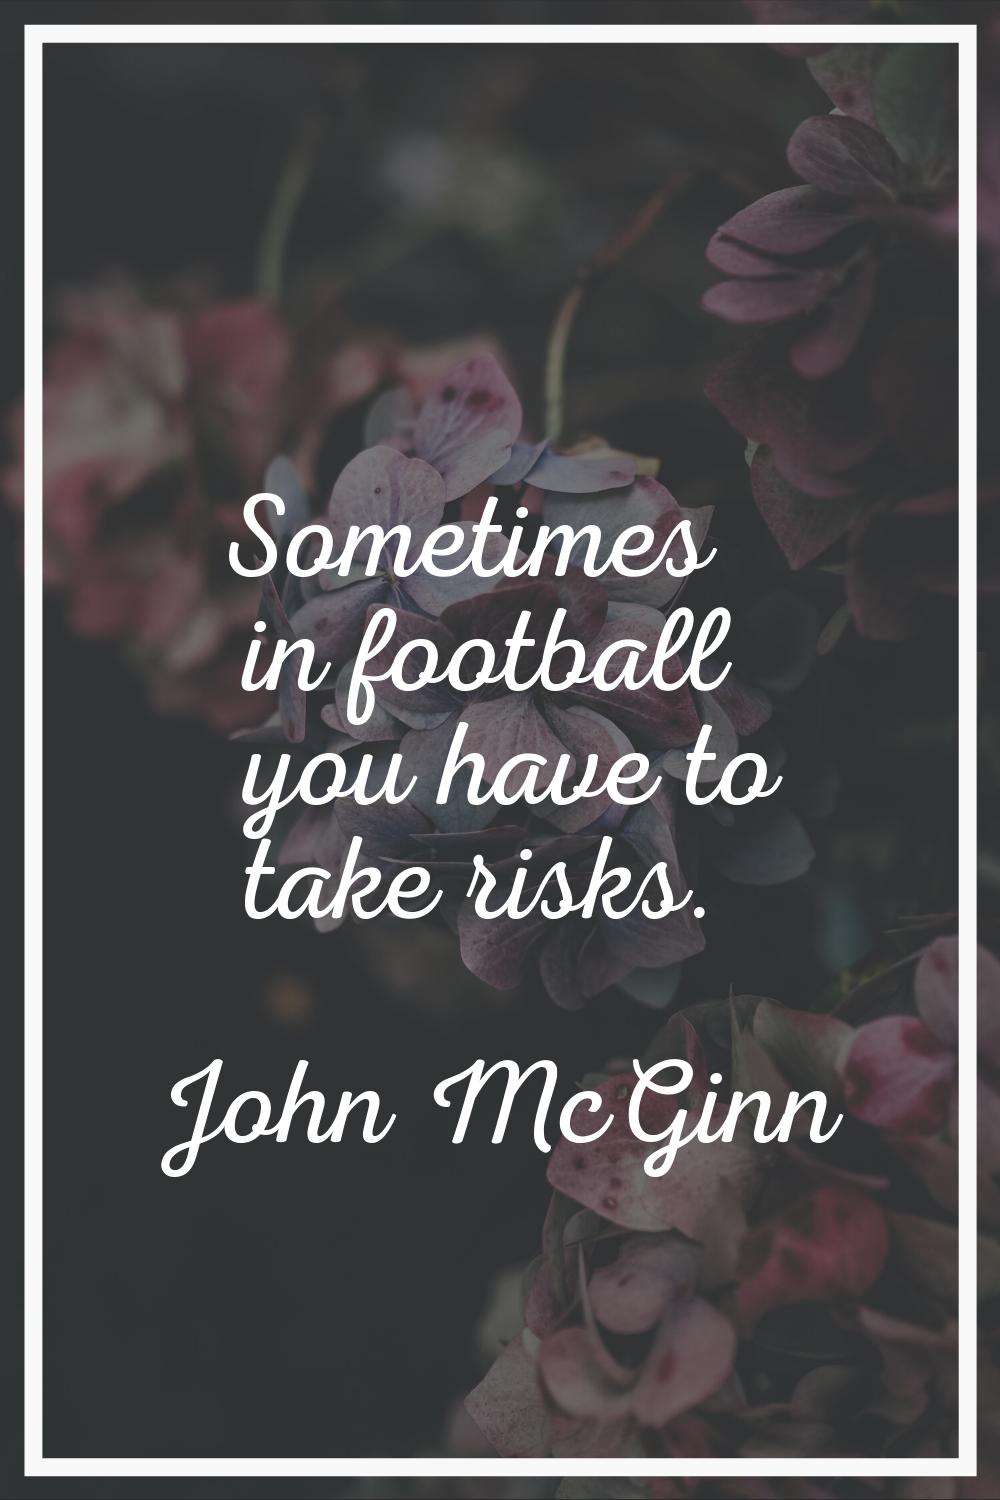 Sometimes in football you have to take risks.